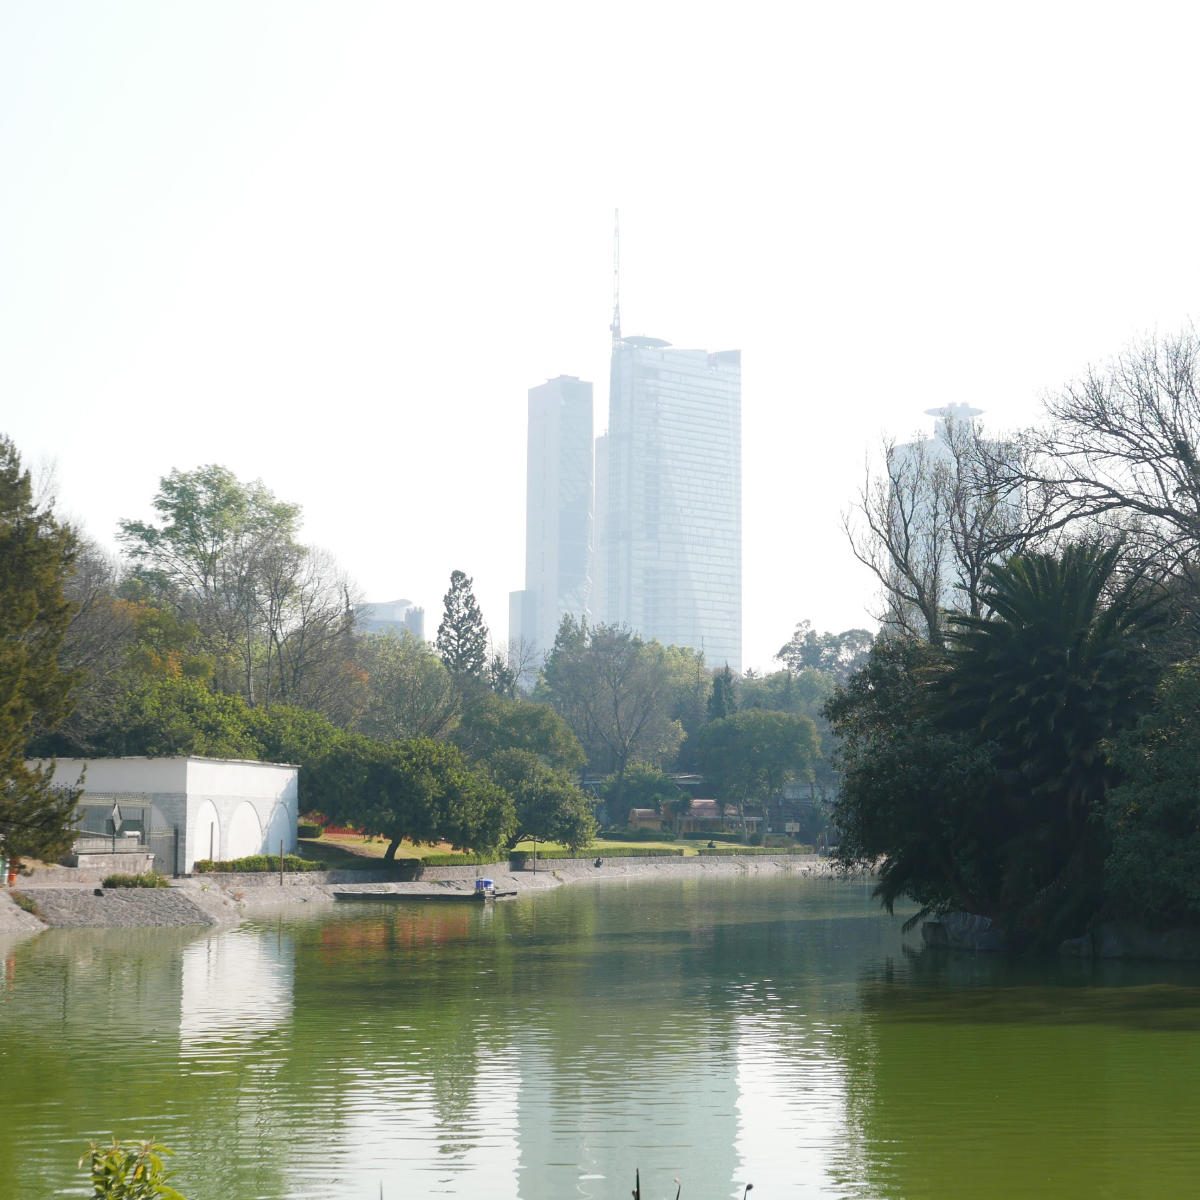 Pond in Chapultepec park in Mexico City